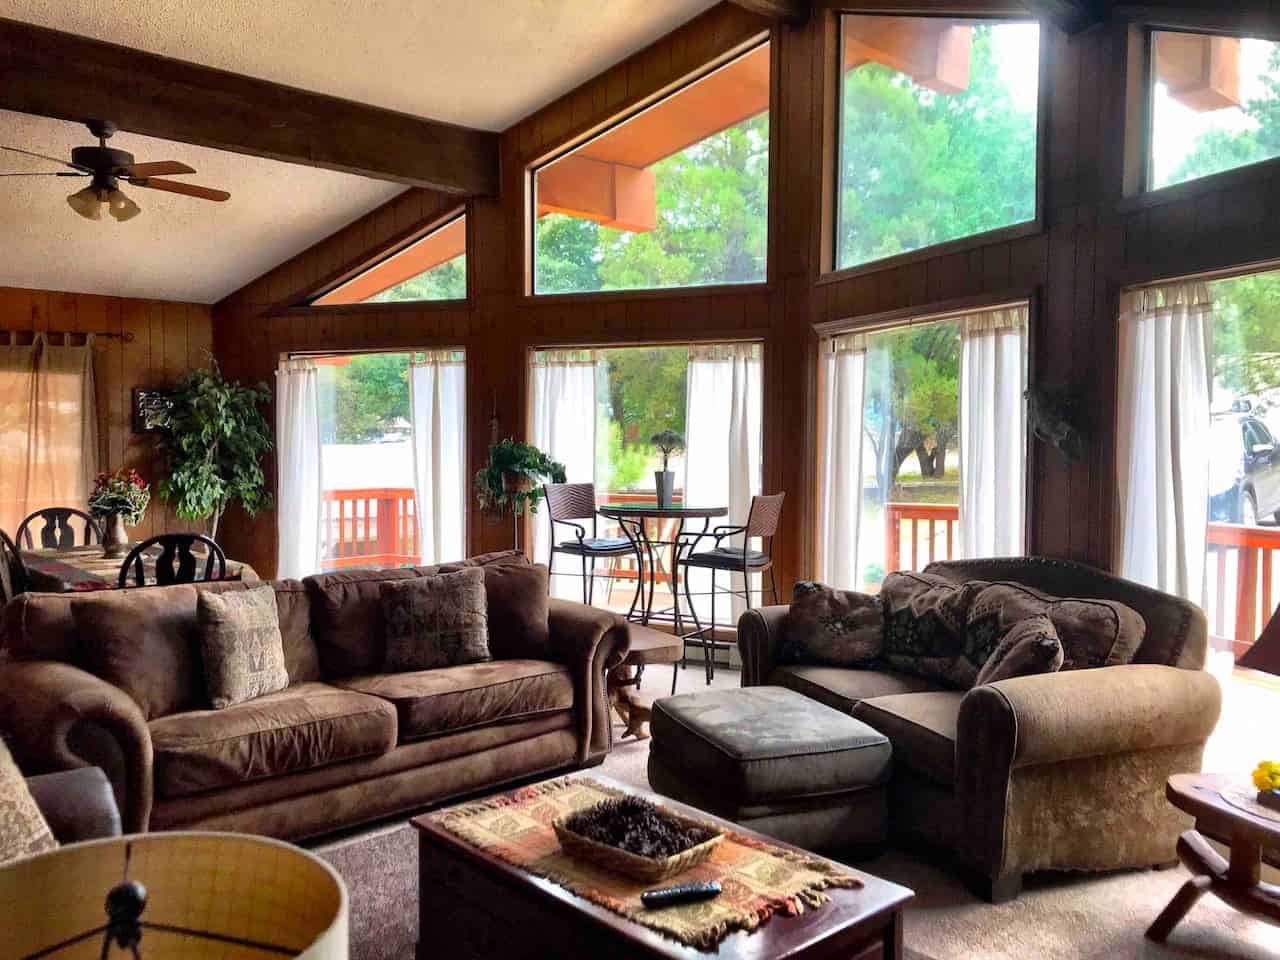 Image of Airbnb rental in Ruidoso, New Mexico